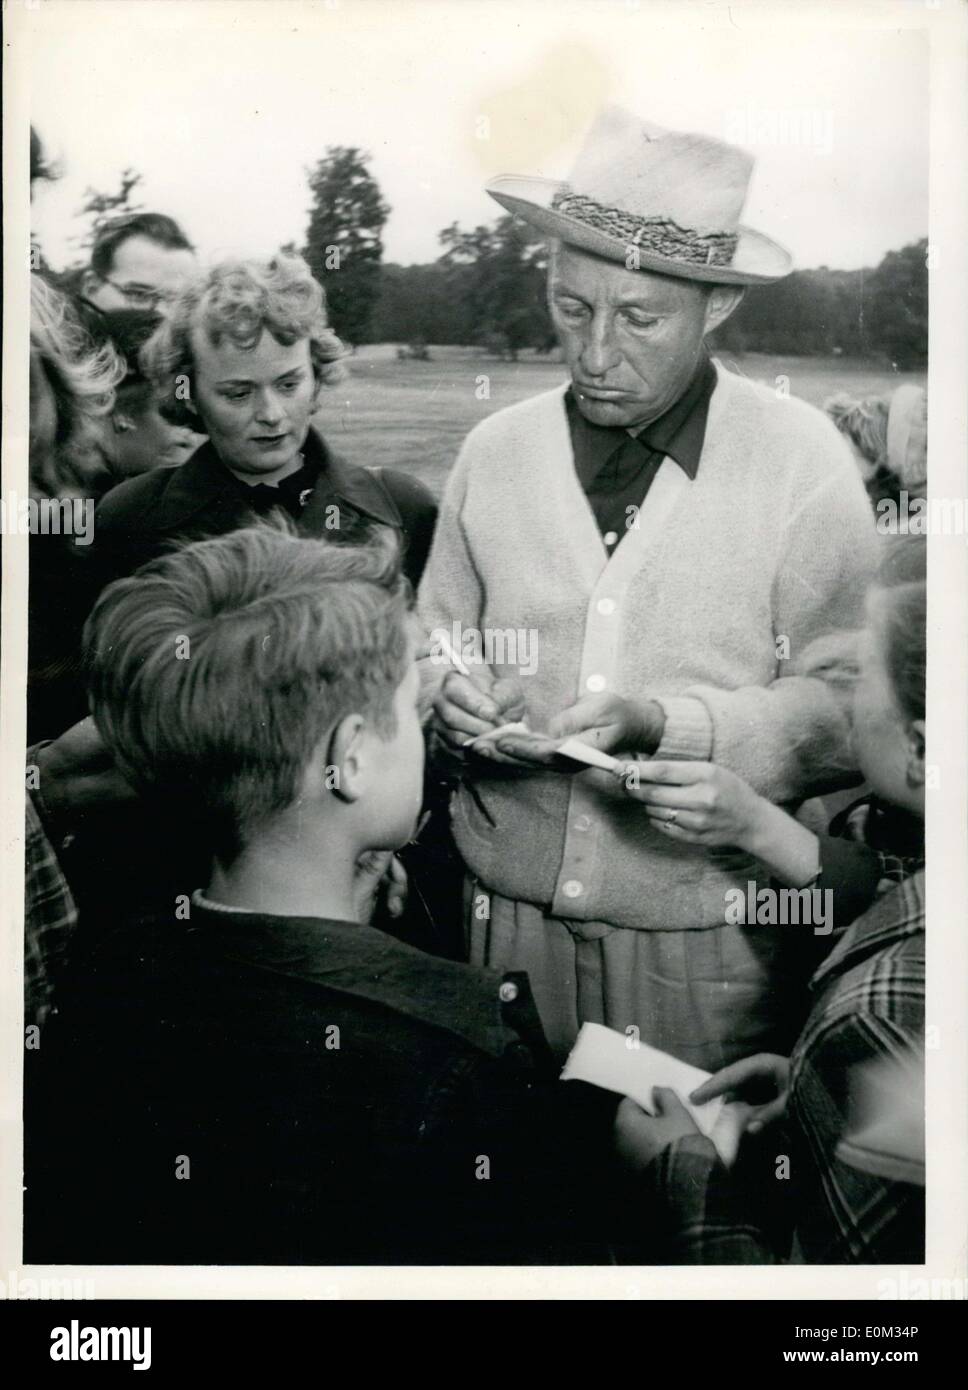 May 28, 1953 - Bing Crosby is pictured here, grimly signing autographs on a Frankfurt golf course. He actually wanted to just play golf, but fans kept coming up to him and asking for autographs that he eventually stopped. Stock Photo